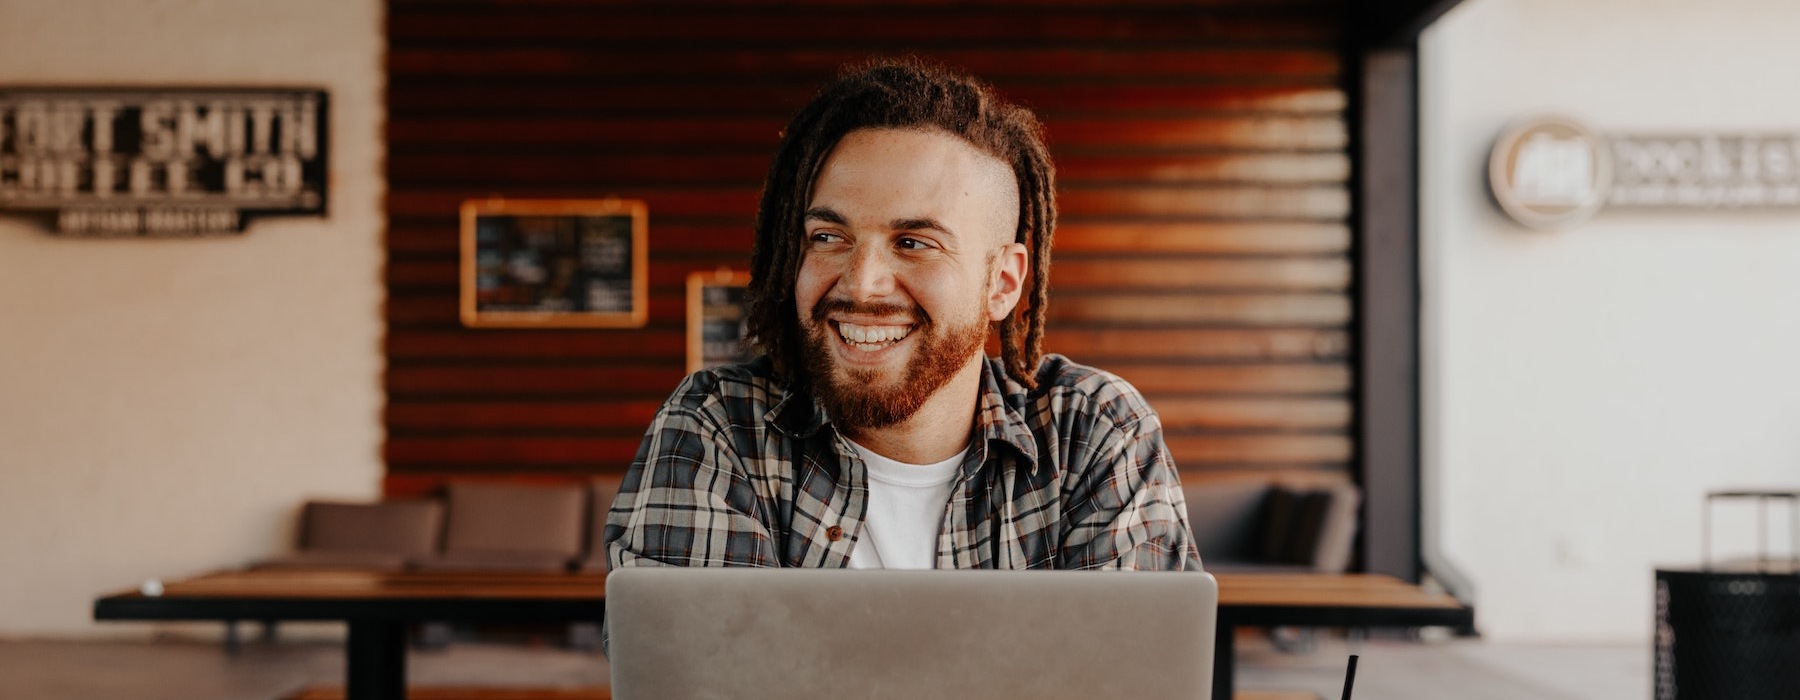 a guy on a laptop smiling